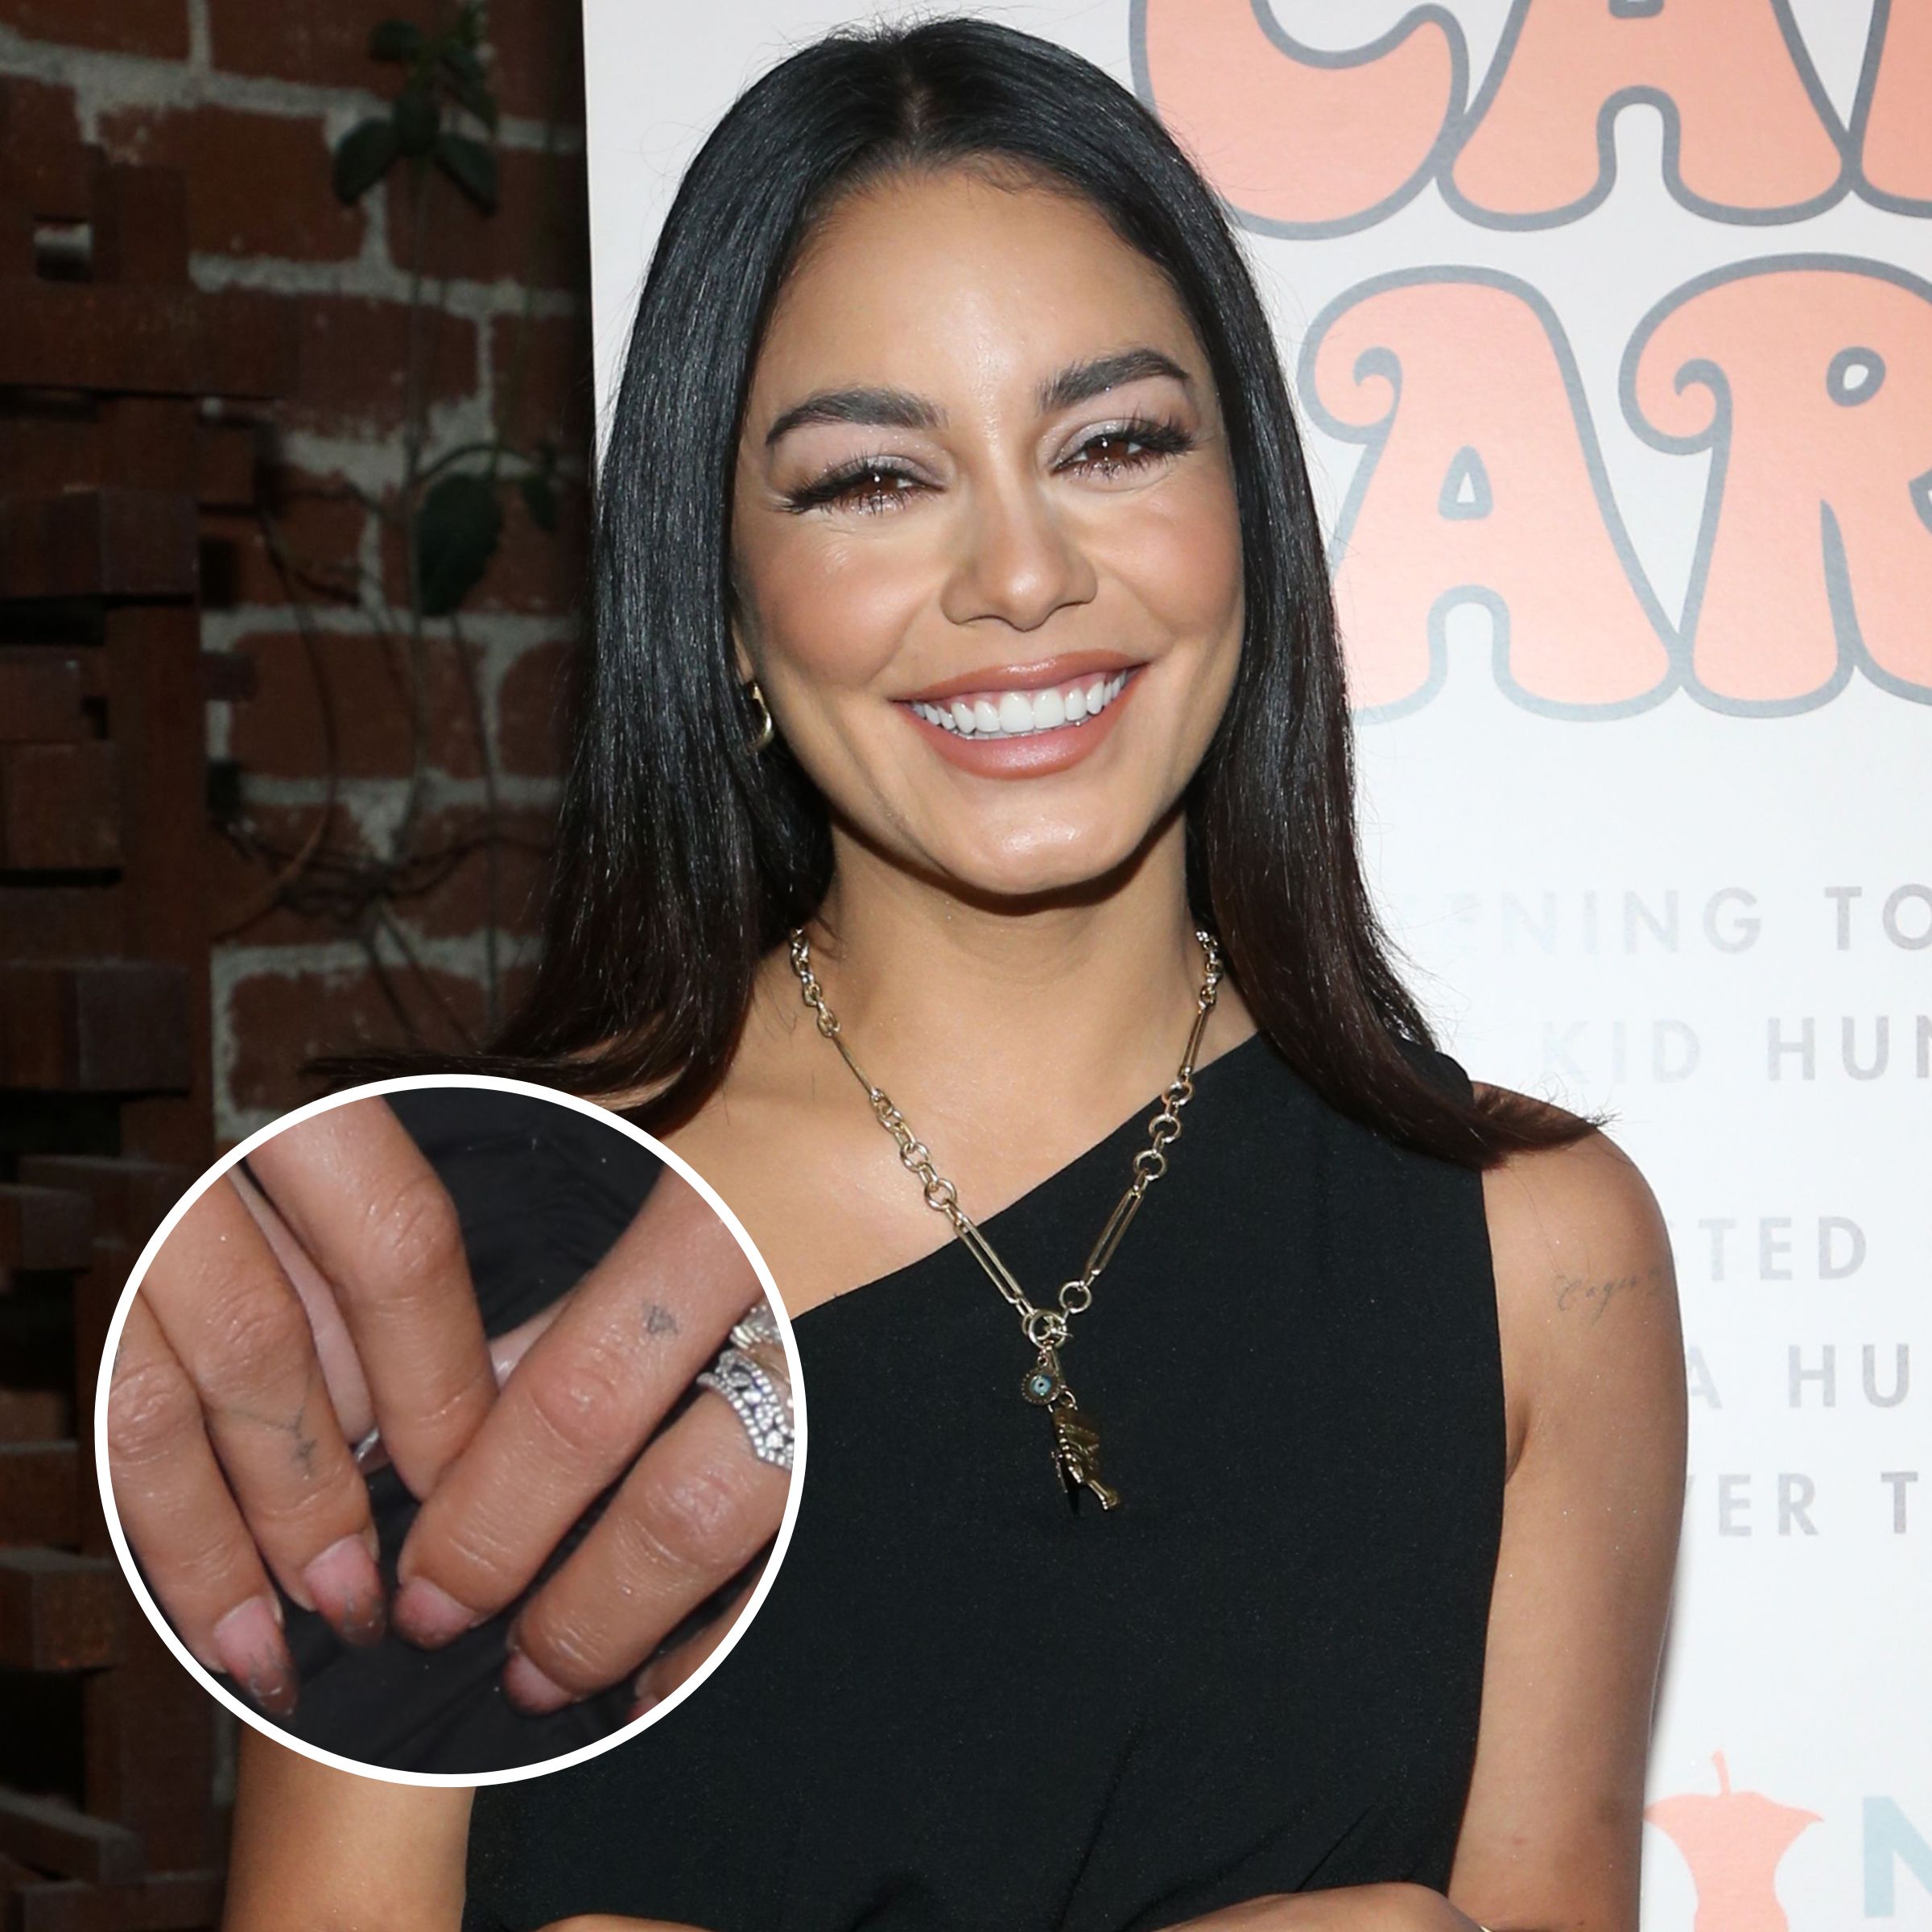 Vanessa Hudgens smiles through pain of first tattoo Its exhilarating   Daily Mail Online